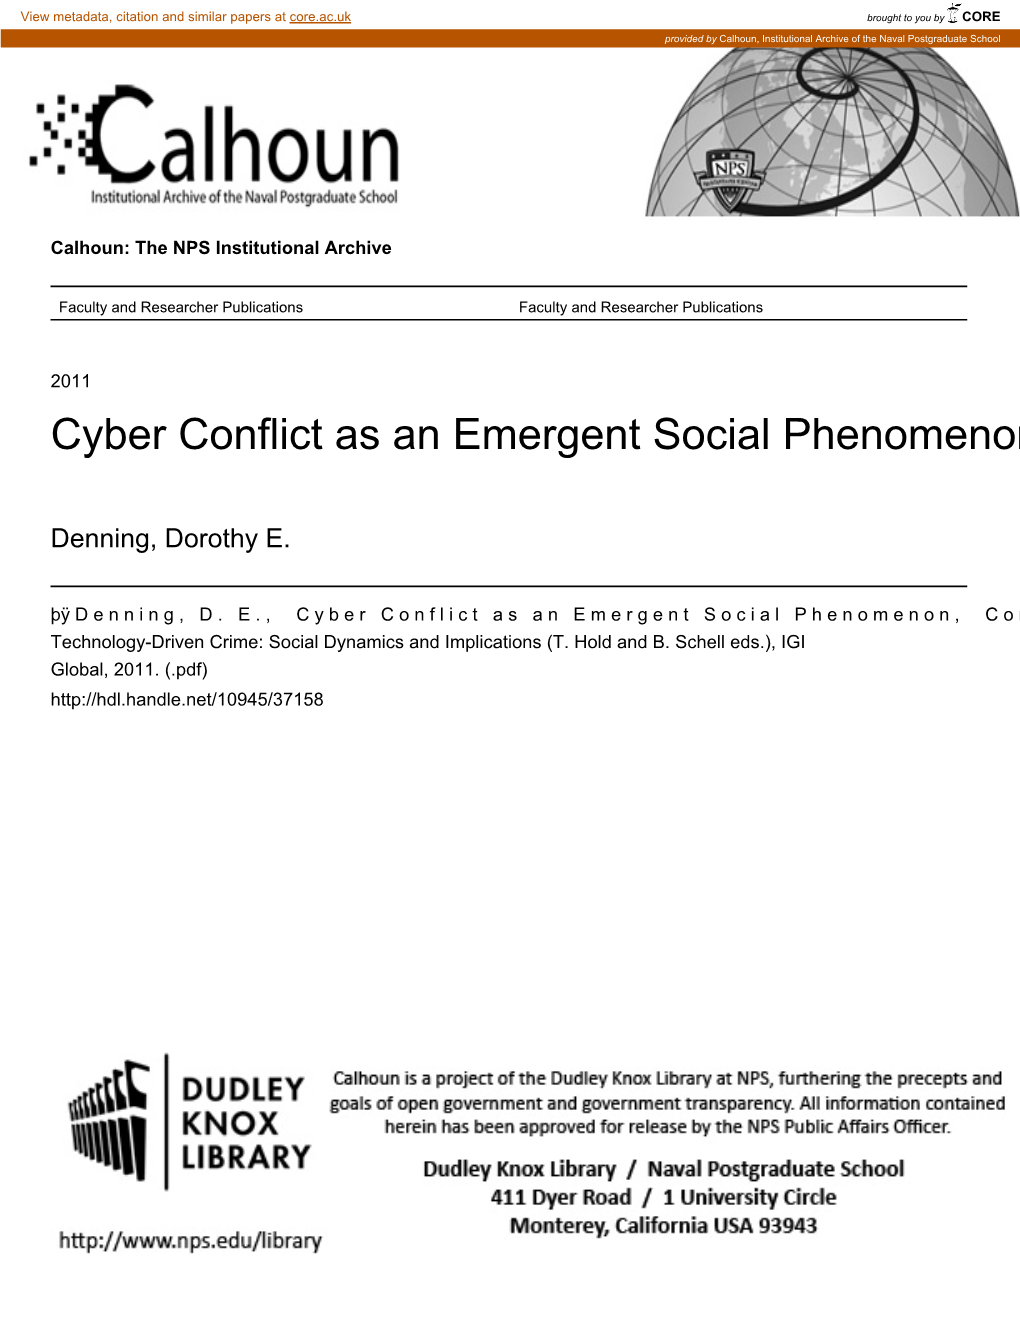 Cyber Conflict As an Emergent Social Phenomenon